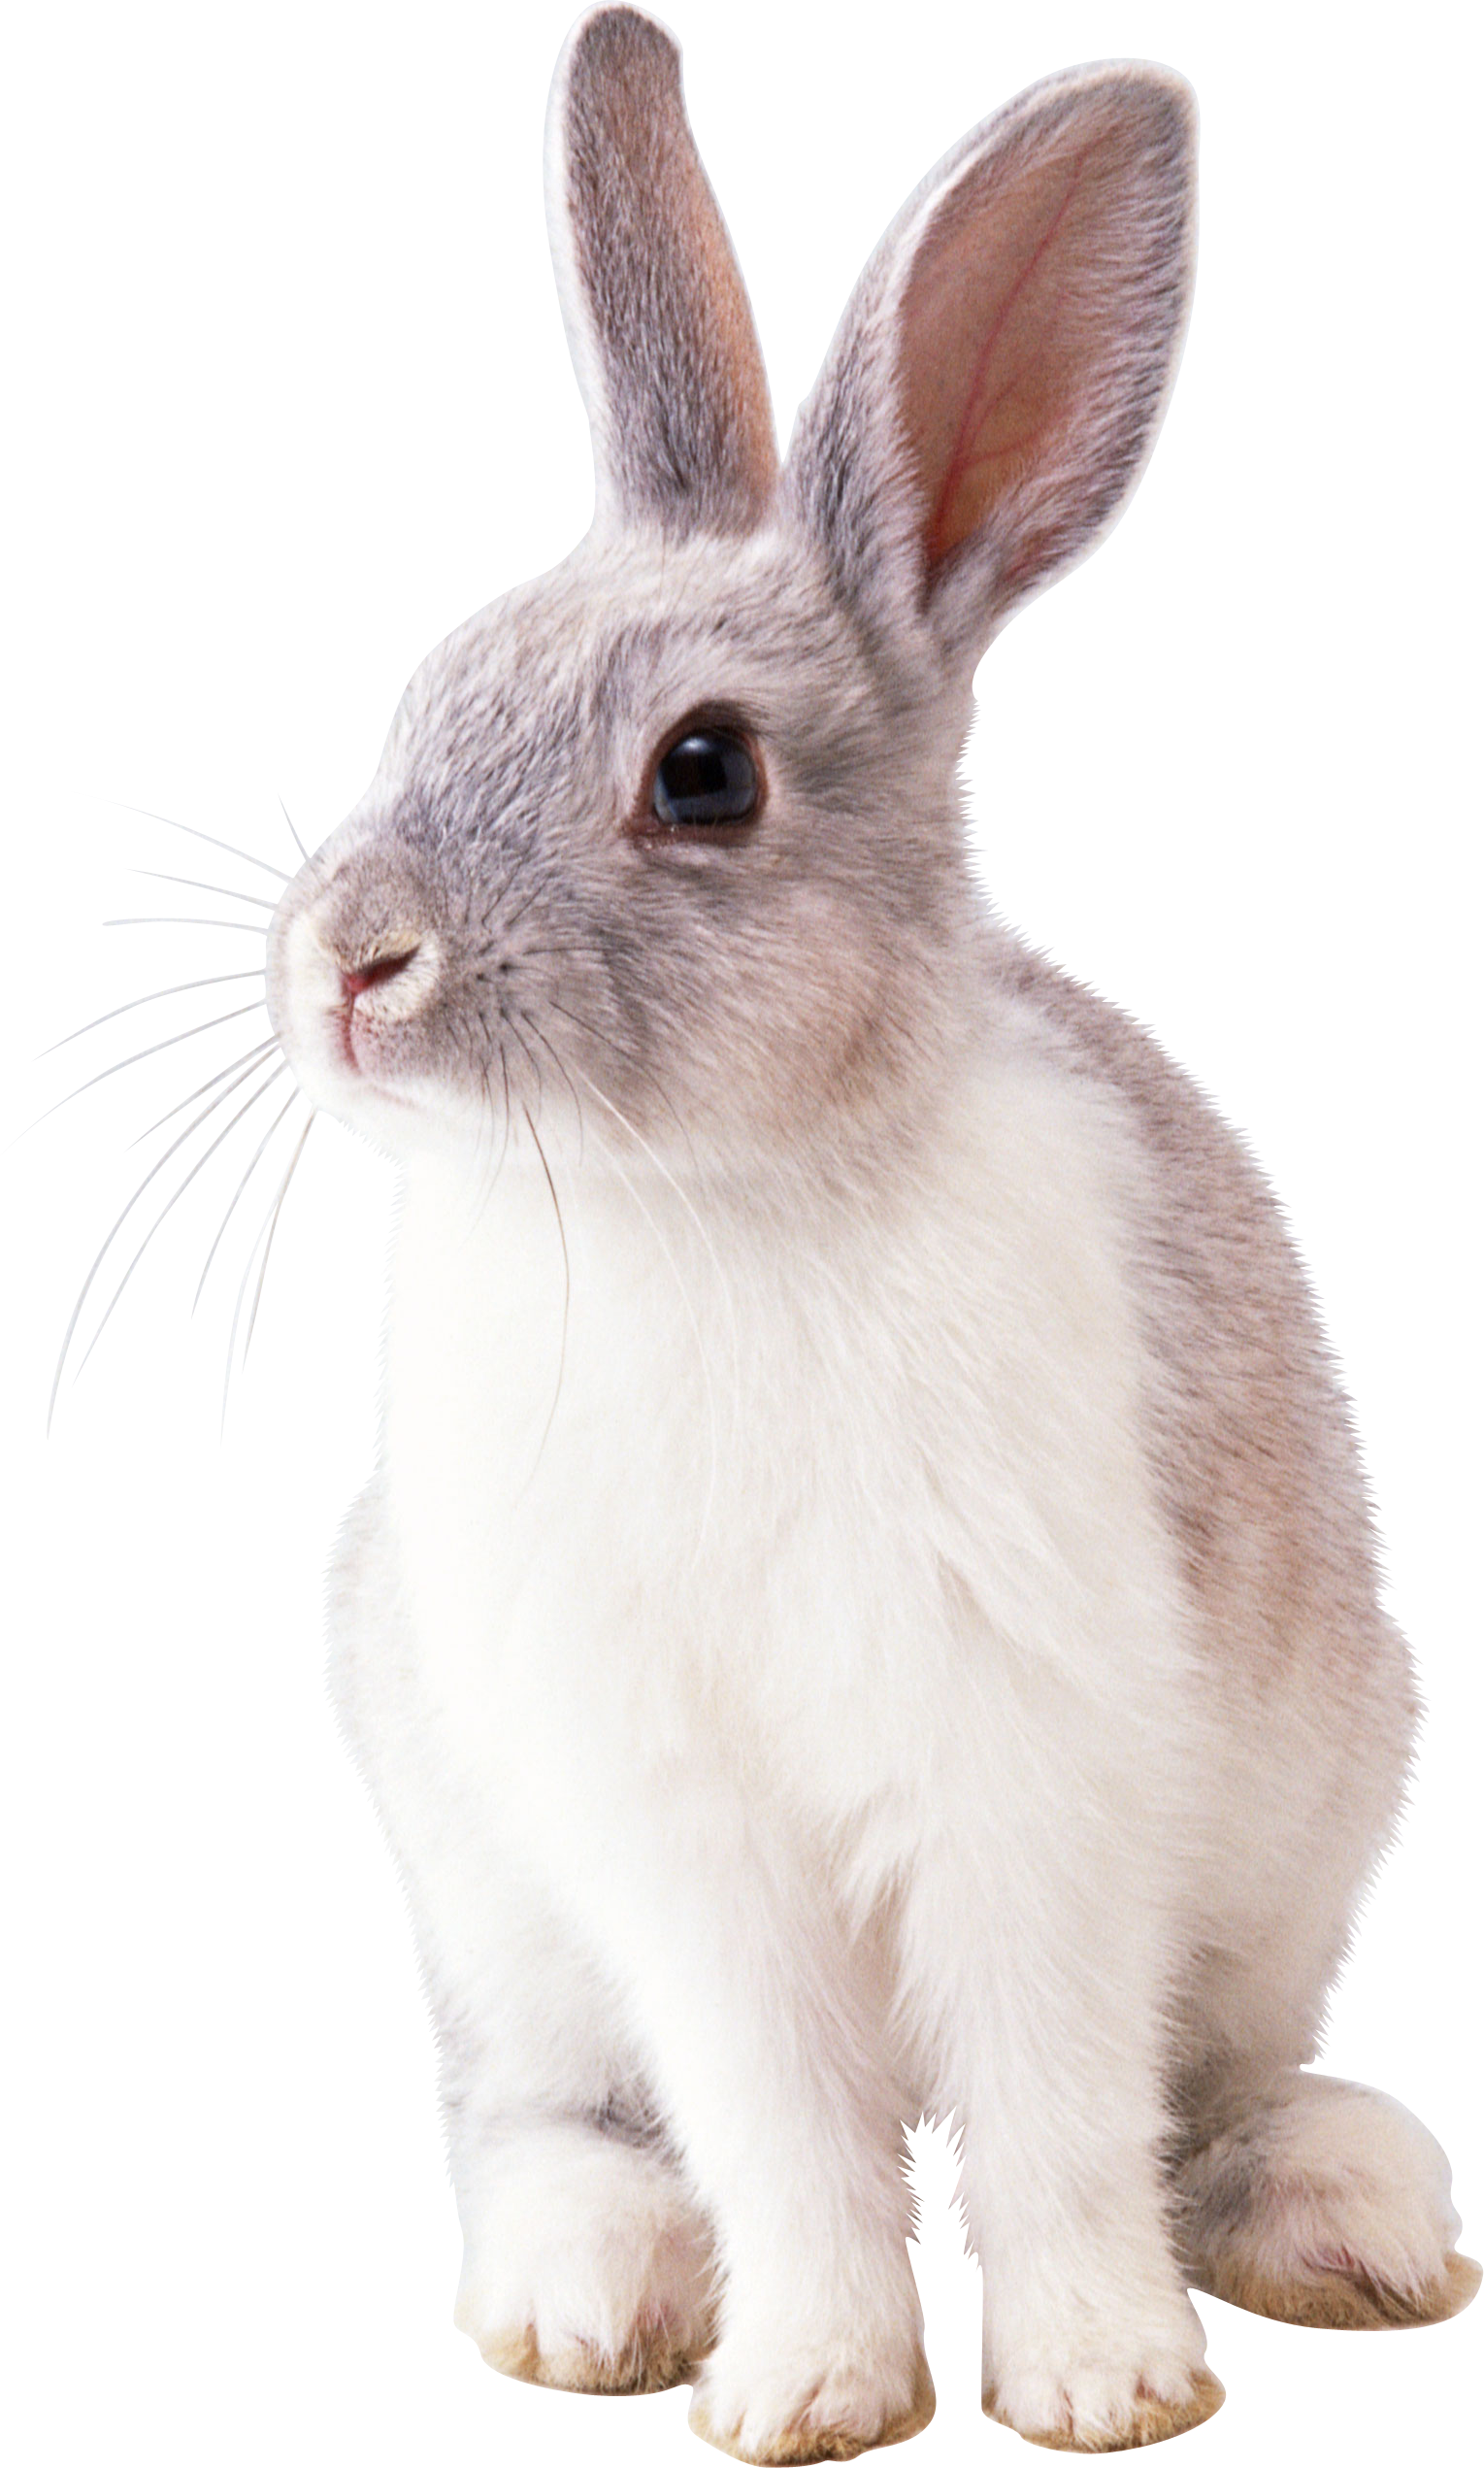 Easter Bunny PNG Pic